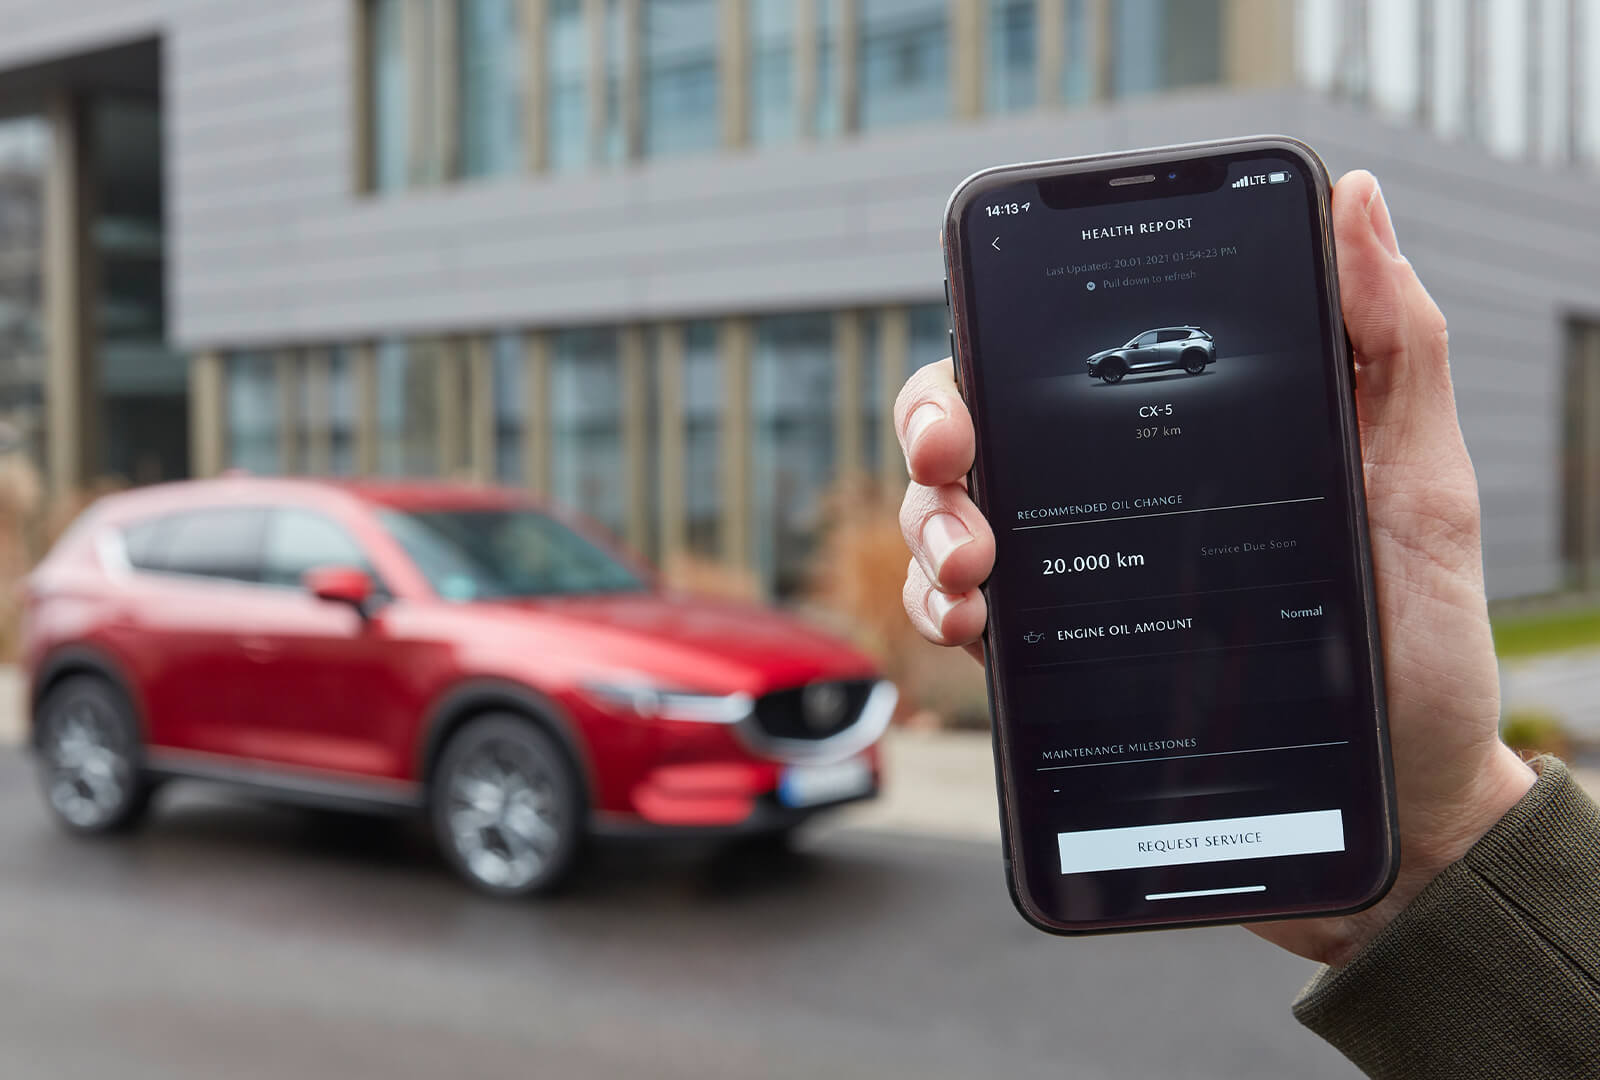 Hand holding up smartphone with MyMazda App displaying CX-5 info.